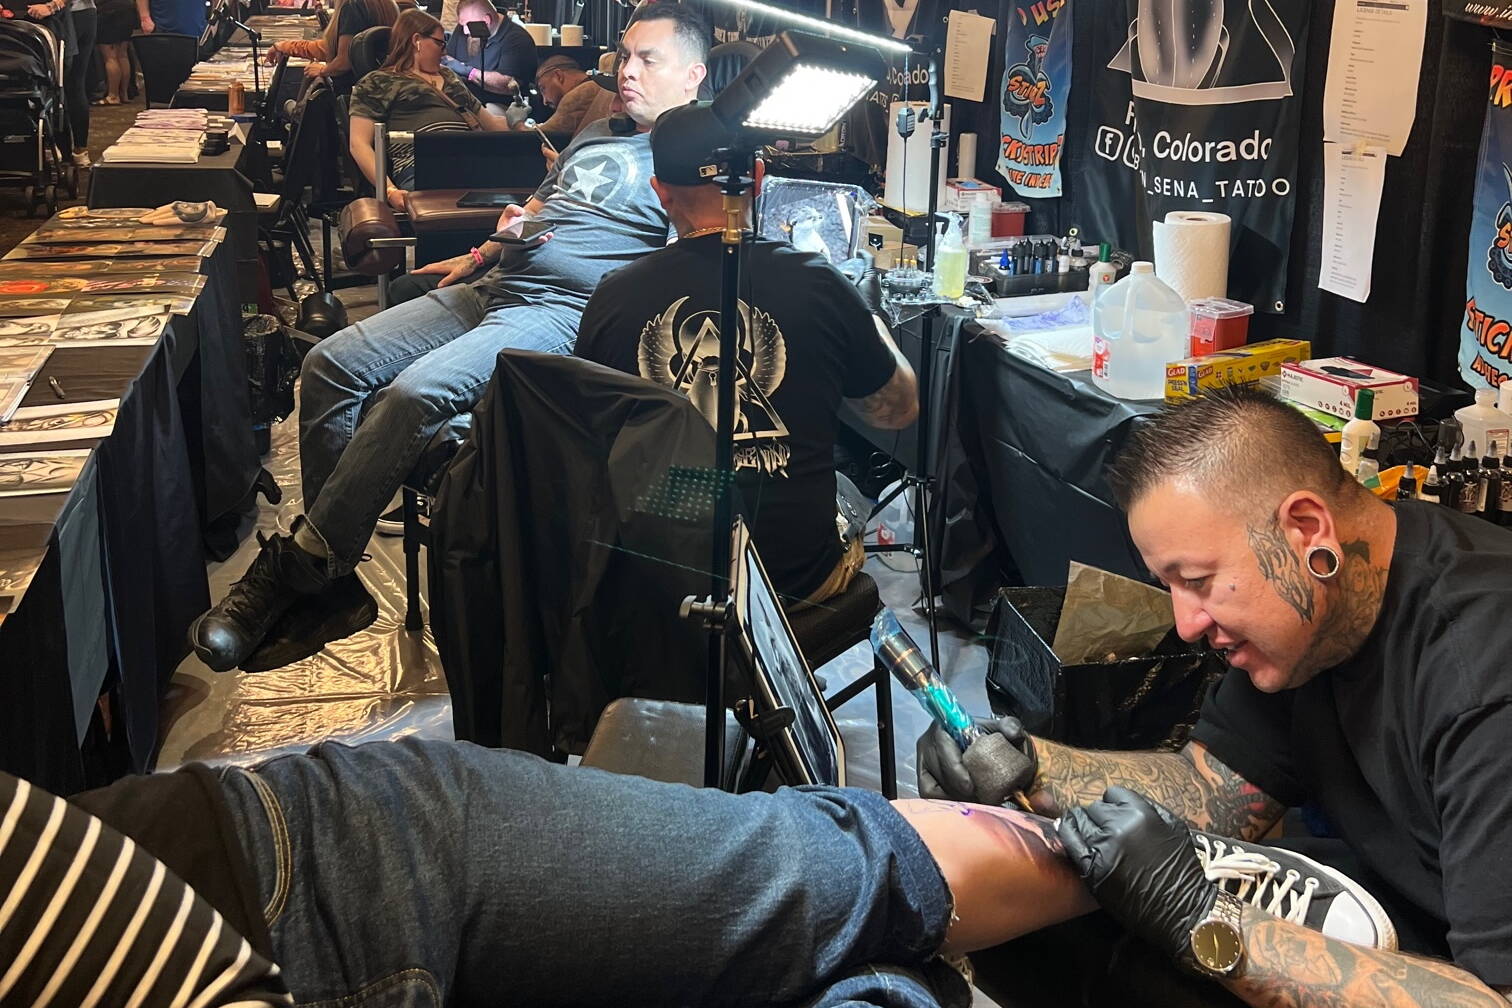 Tattoo artists make their marks on attendees at a Ink Masters Tattoo Show in Colorado. (Courtesy of Ink Masters)